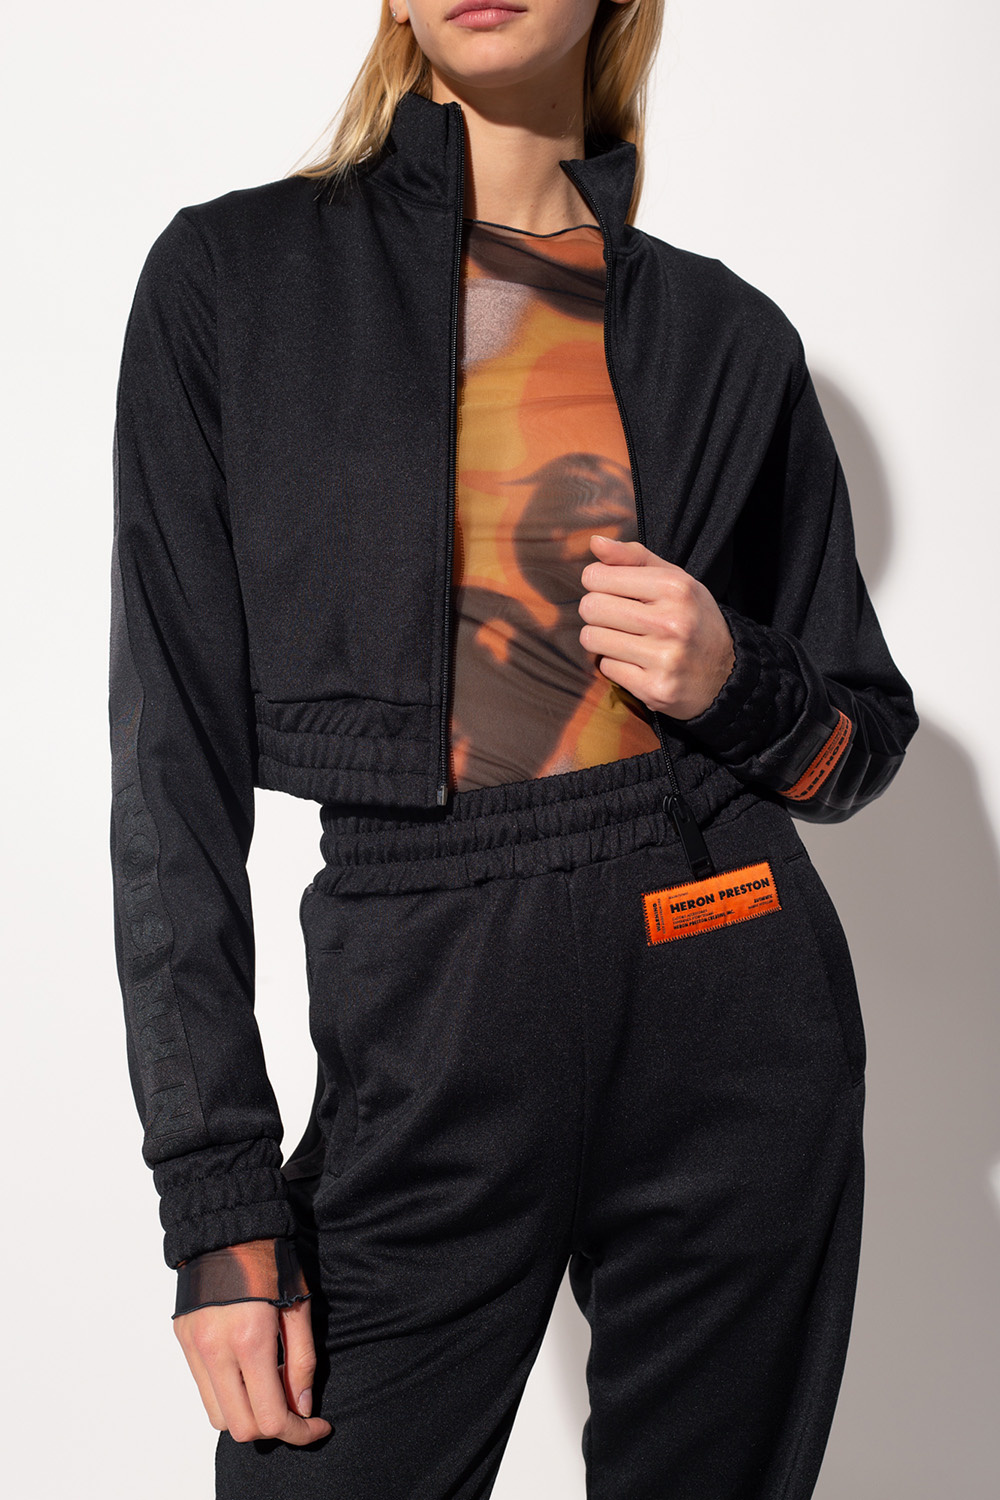 Heron Preston The mens collection includes androgenic shirts